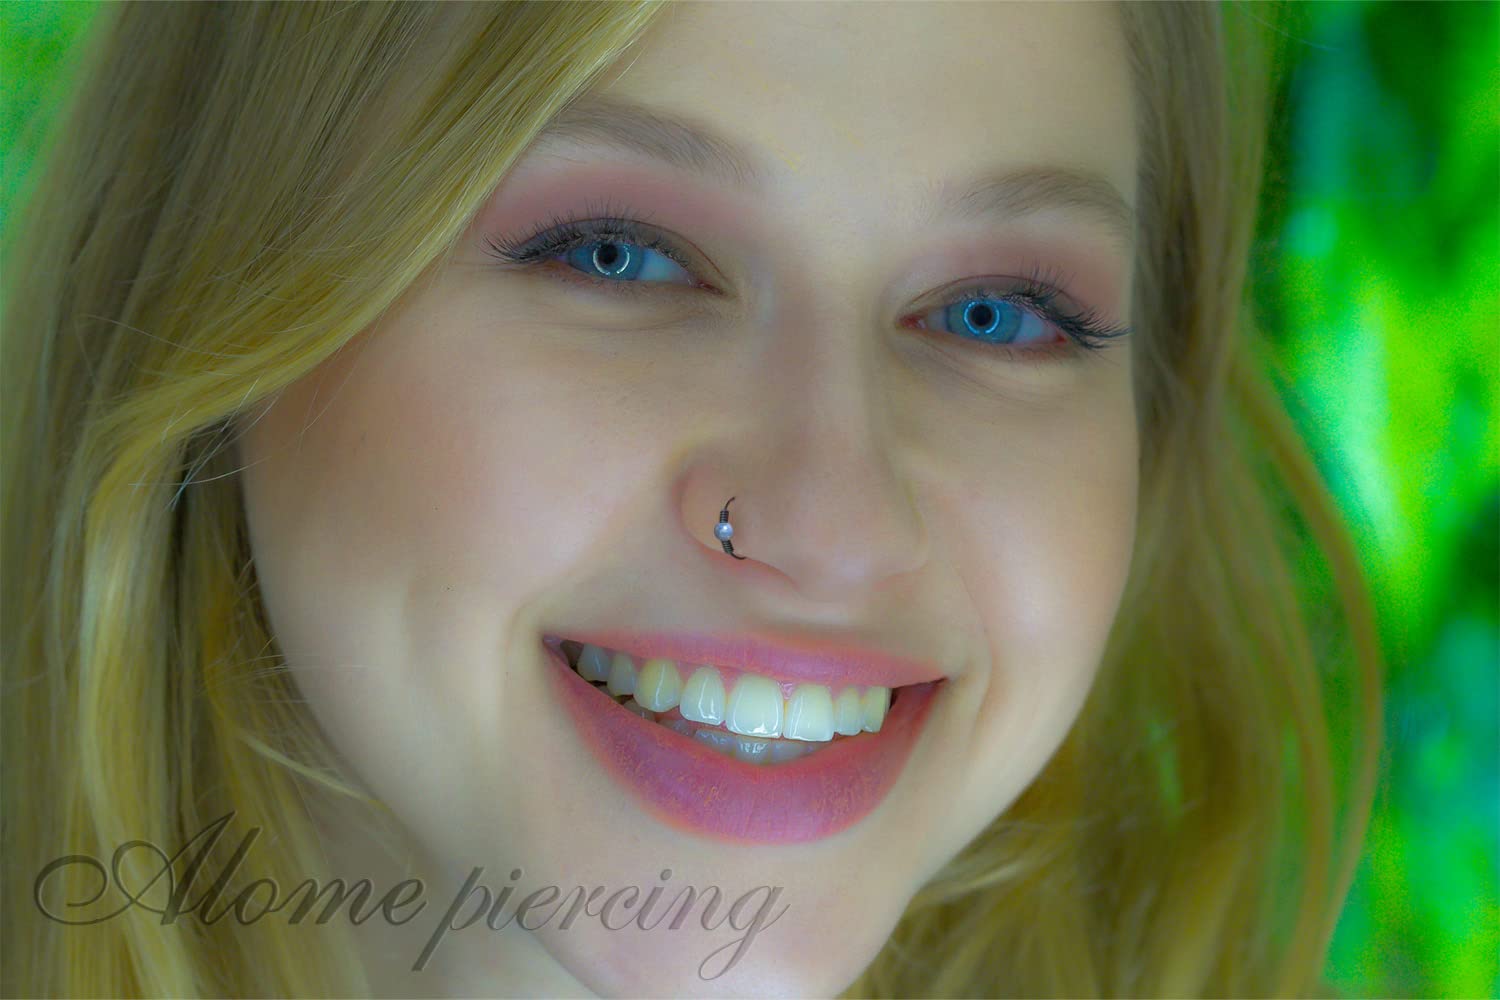 Amazon.com: Tiny Gold Nose Ring - Handmade 14k Gold Nose Piercing with a  2mm Black Gem - Thin 24 Gauge 7mm Hoop - Comfortable Nose Piercings :  Handmade Products